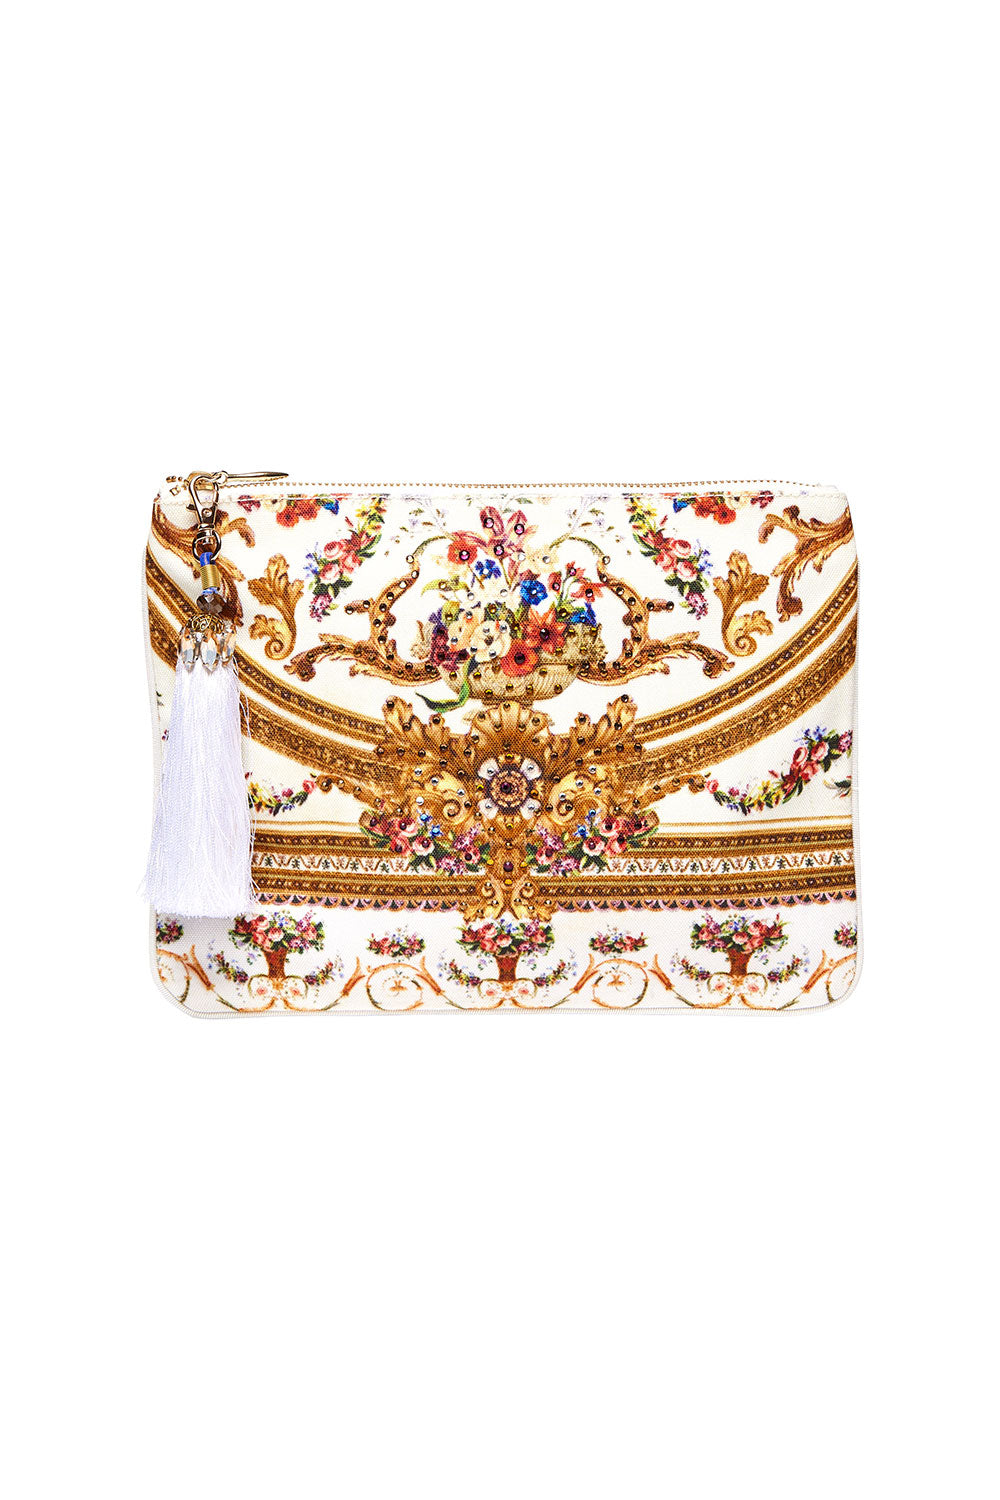 SMALL CANVAS CLUTCH OLYMPE ODE